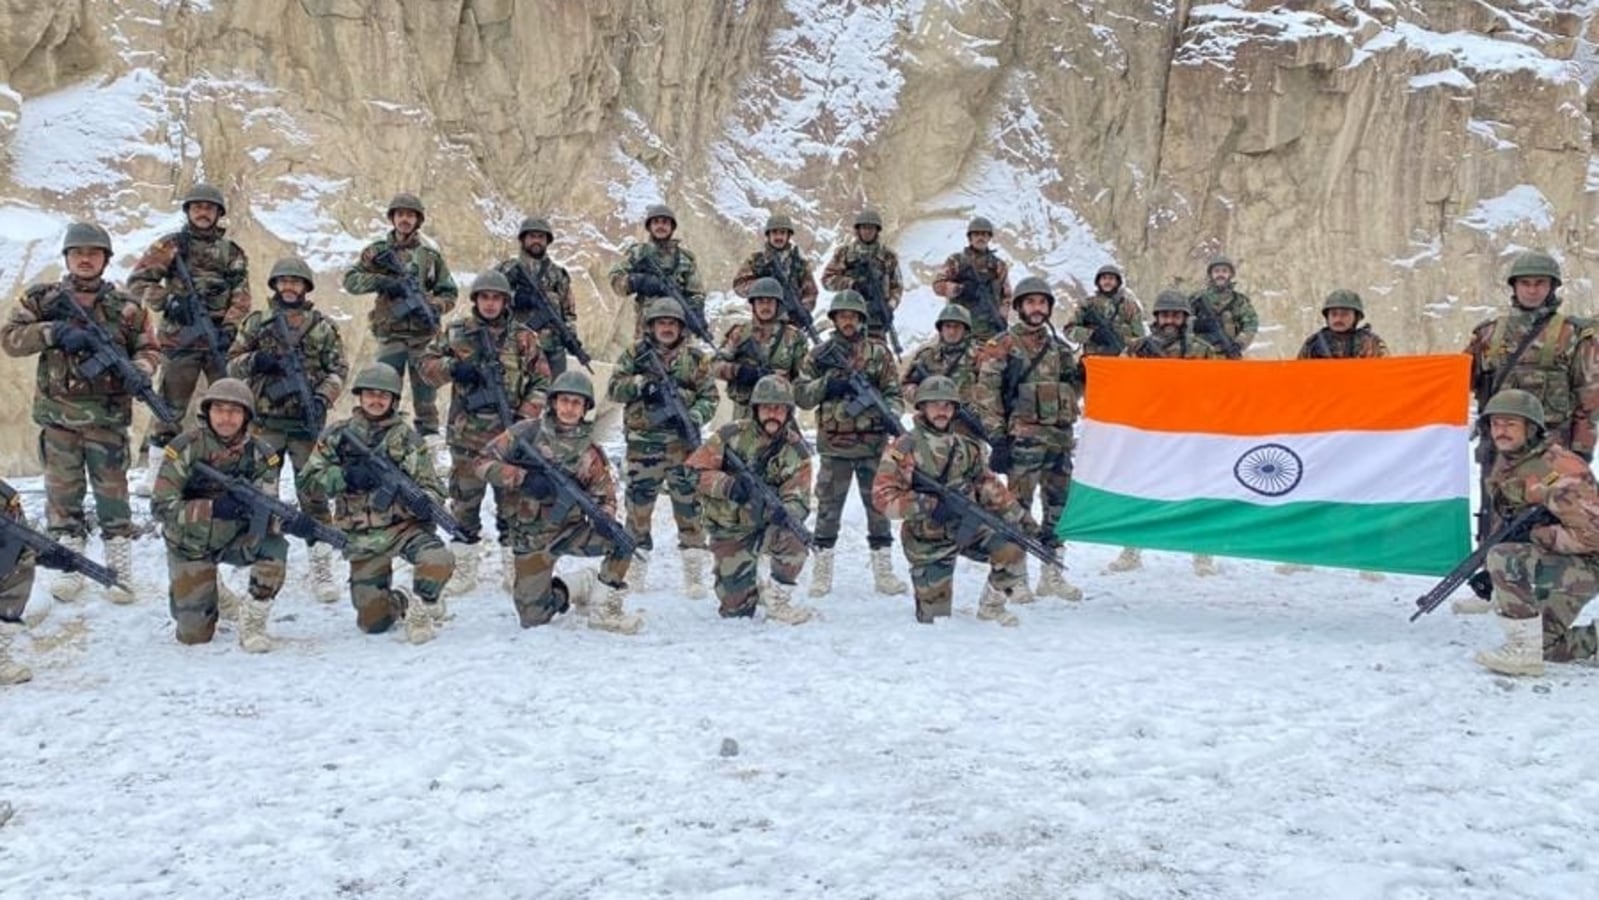 Troops celebrate new year unfurling Tricolour at Galwan Valley | Latest News India - Hindustan Times